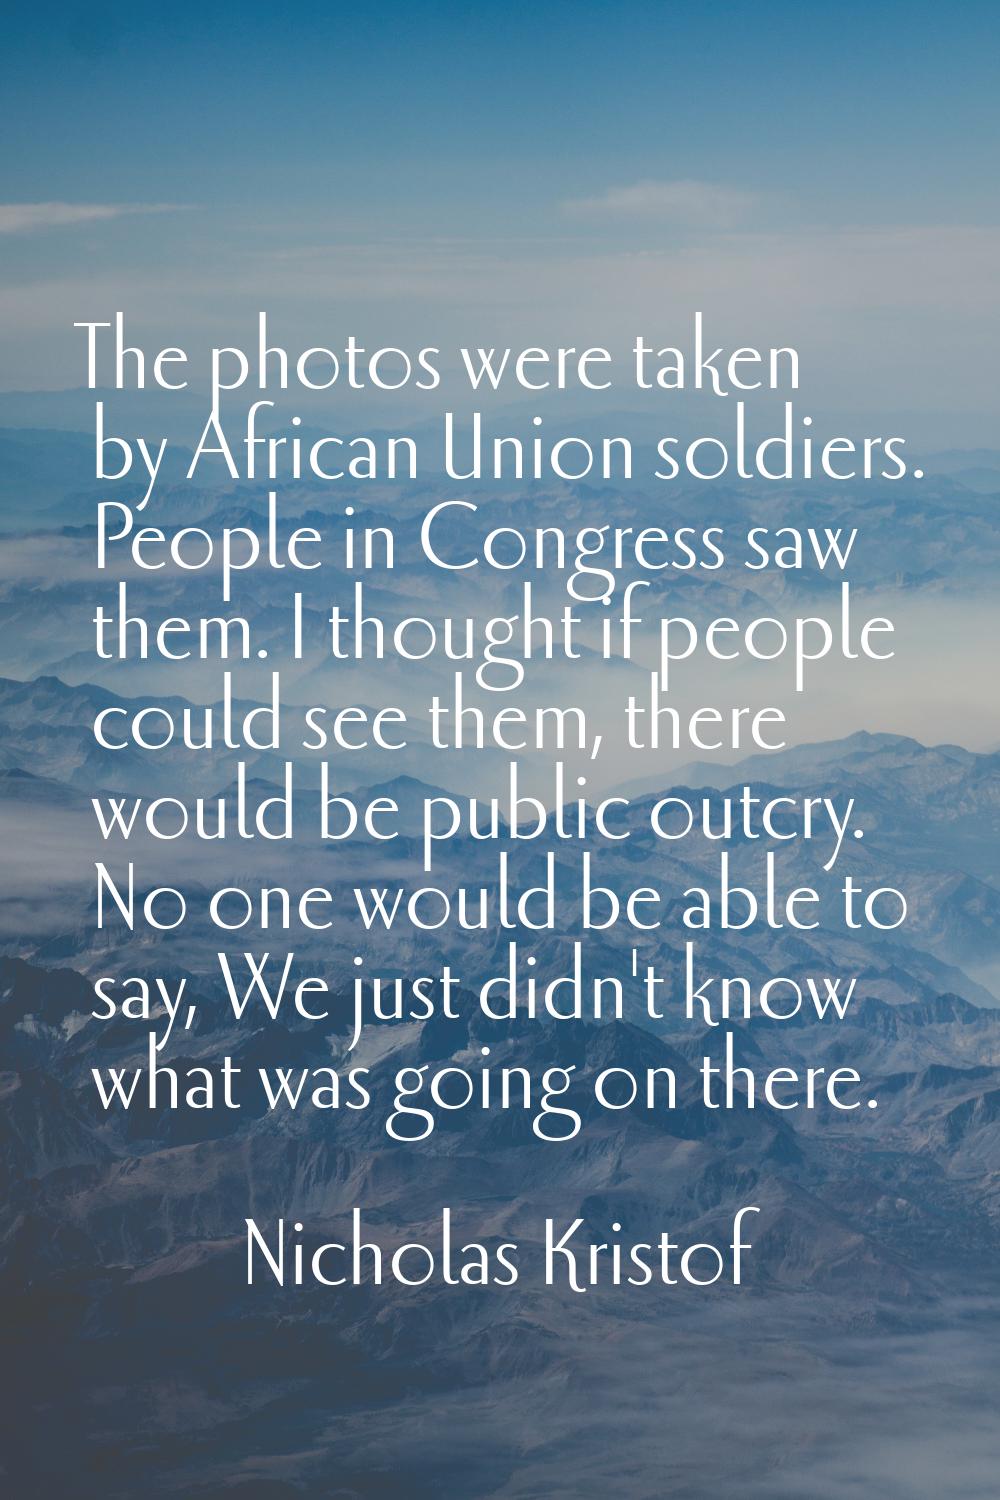 The photos were taken by African Union soldiers. People in Congress saw them. I thought if people c